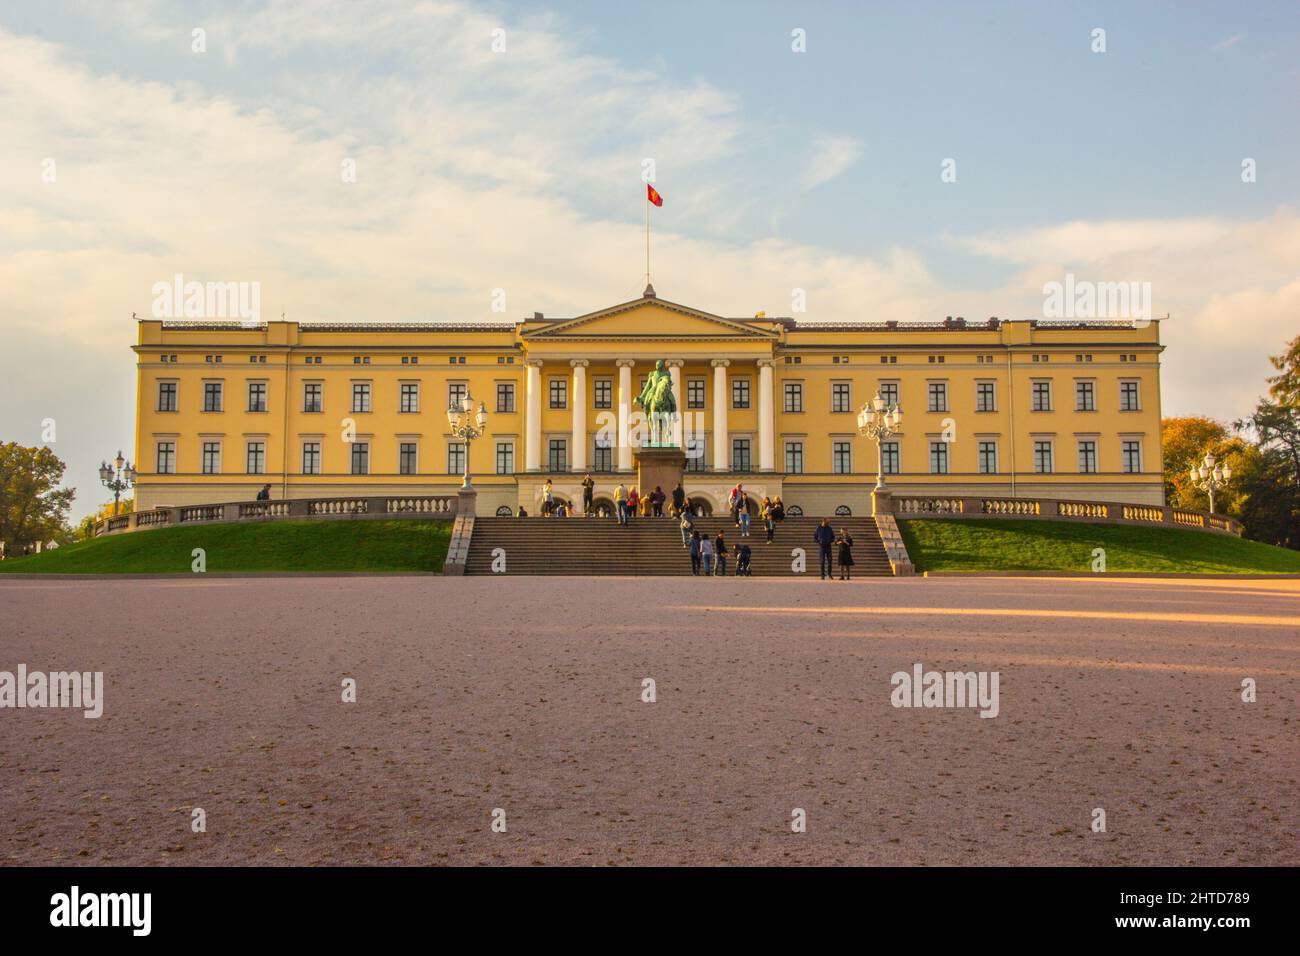 Beautiful shot of the Royal Palace in Oslo, Norway Stock Photo